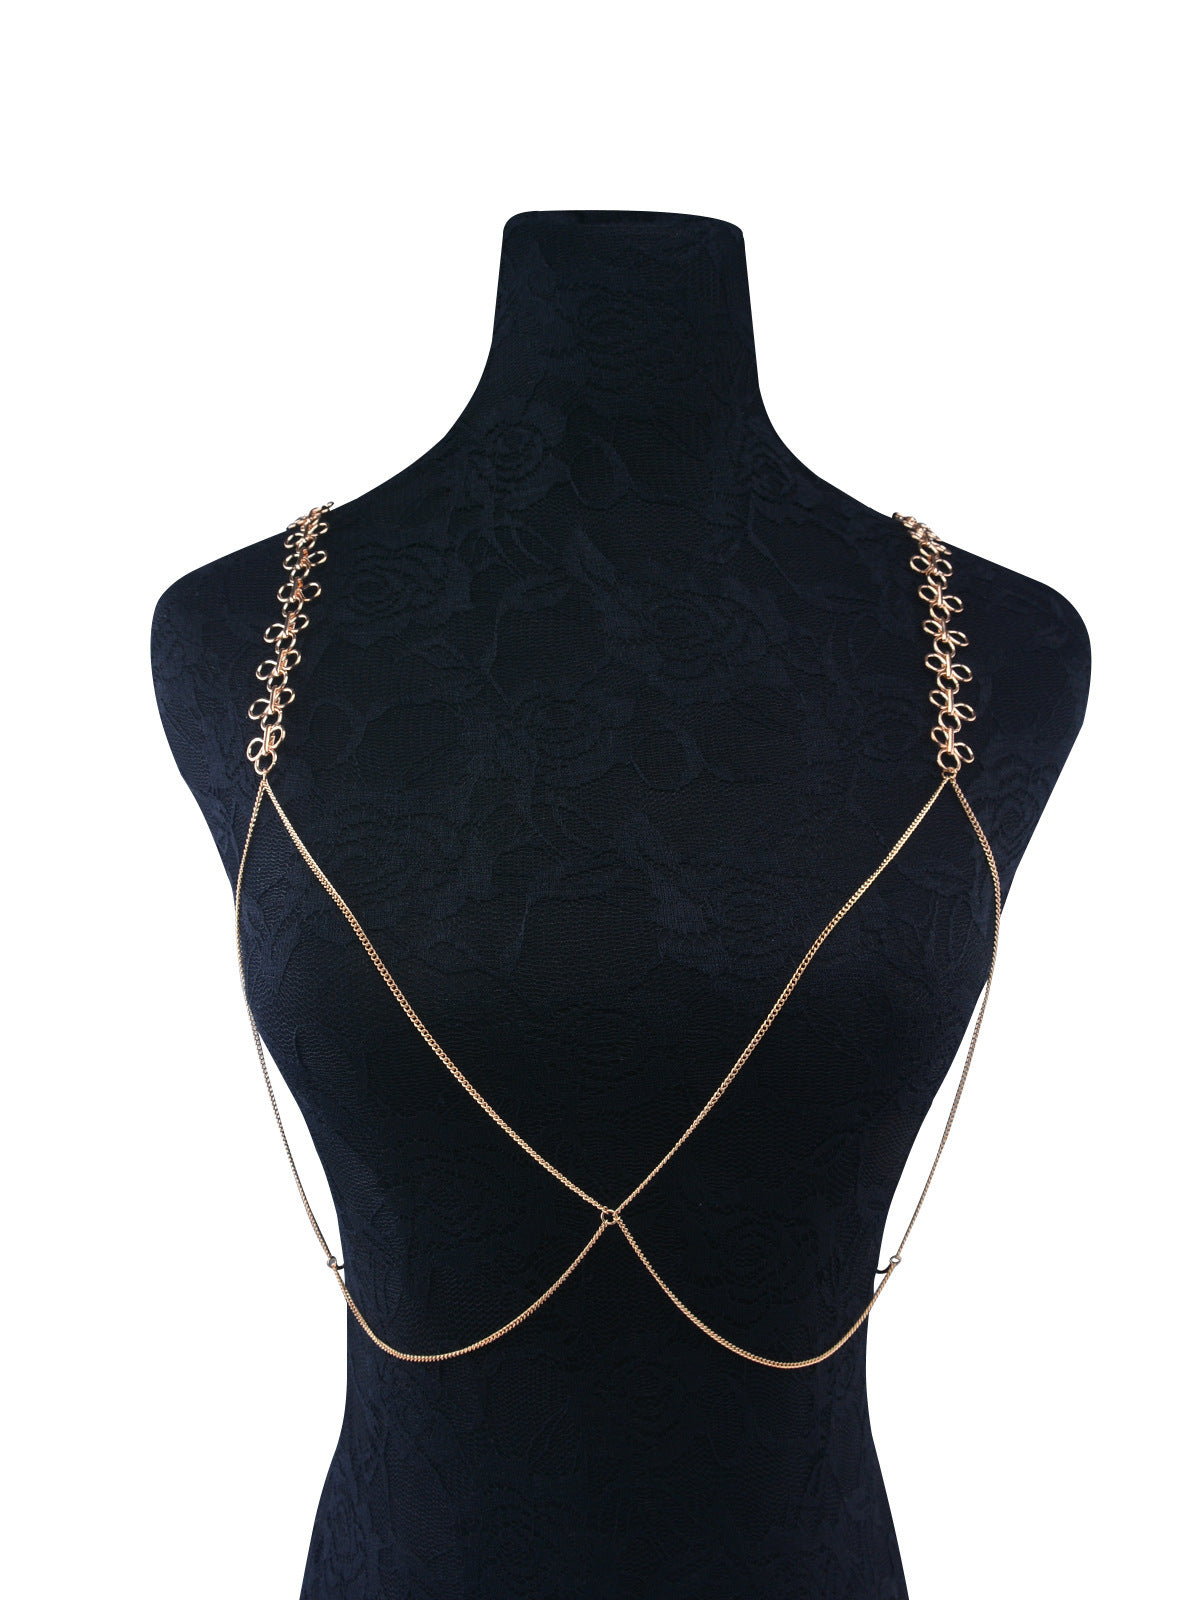 Alloy necklace body chain